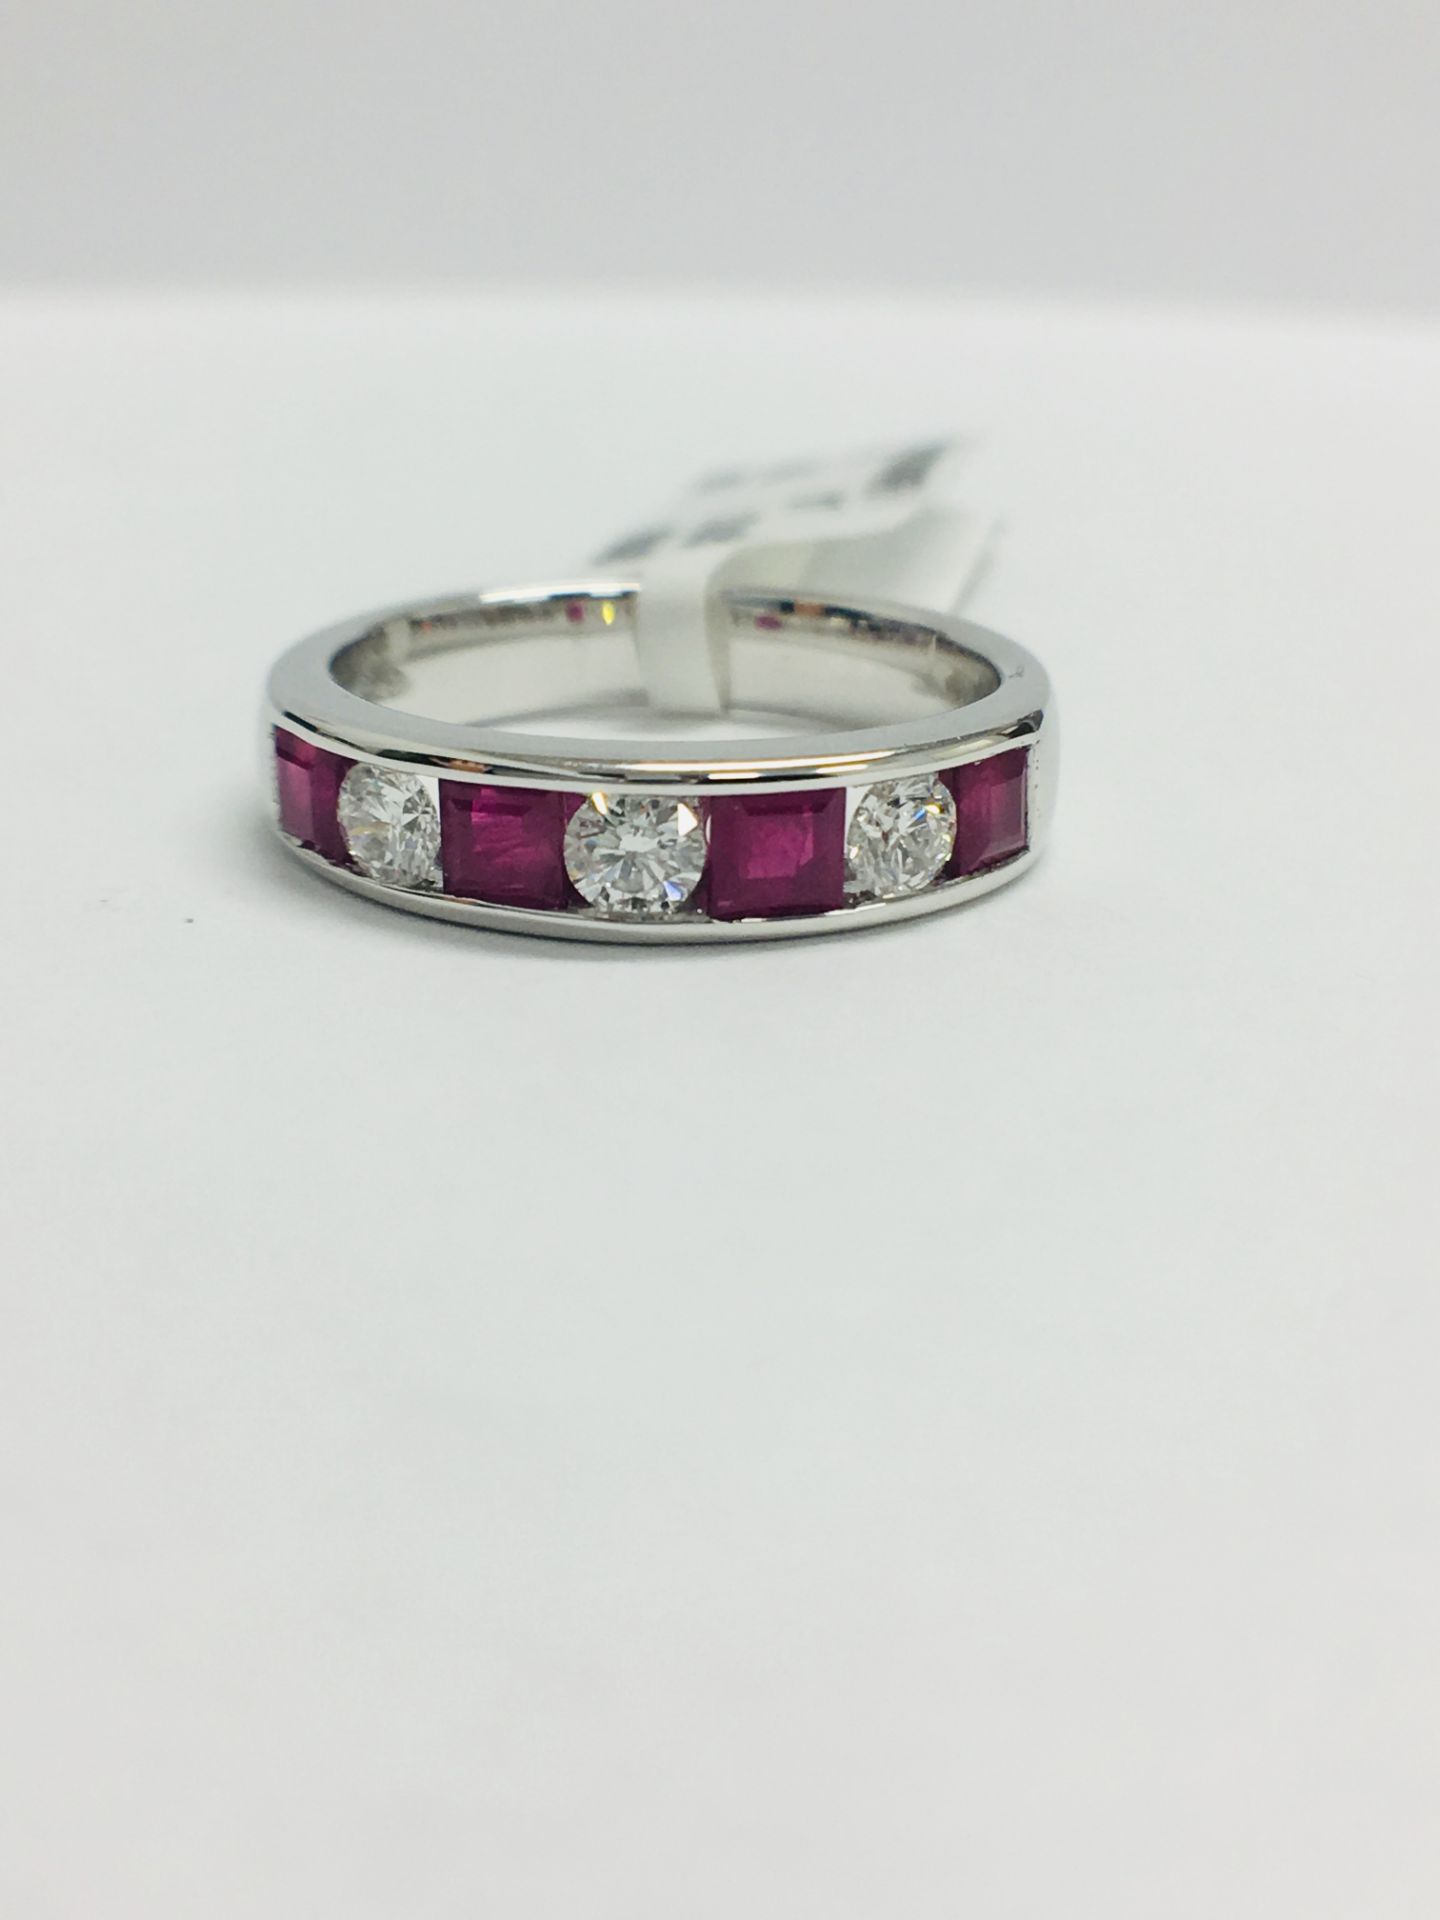 9ct White Gold Ruby Diamond Channel Set Ring - Image 2 of 9